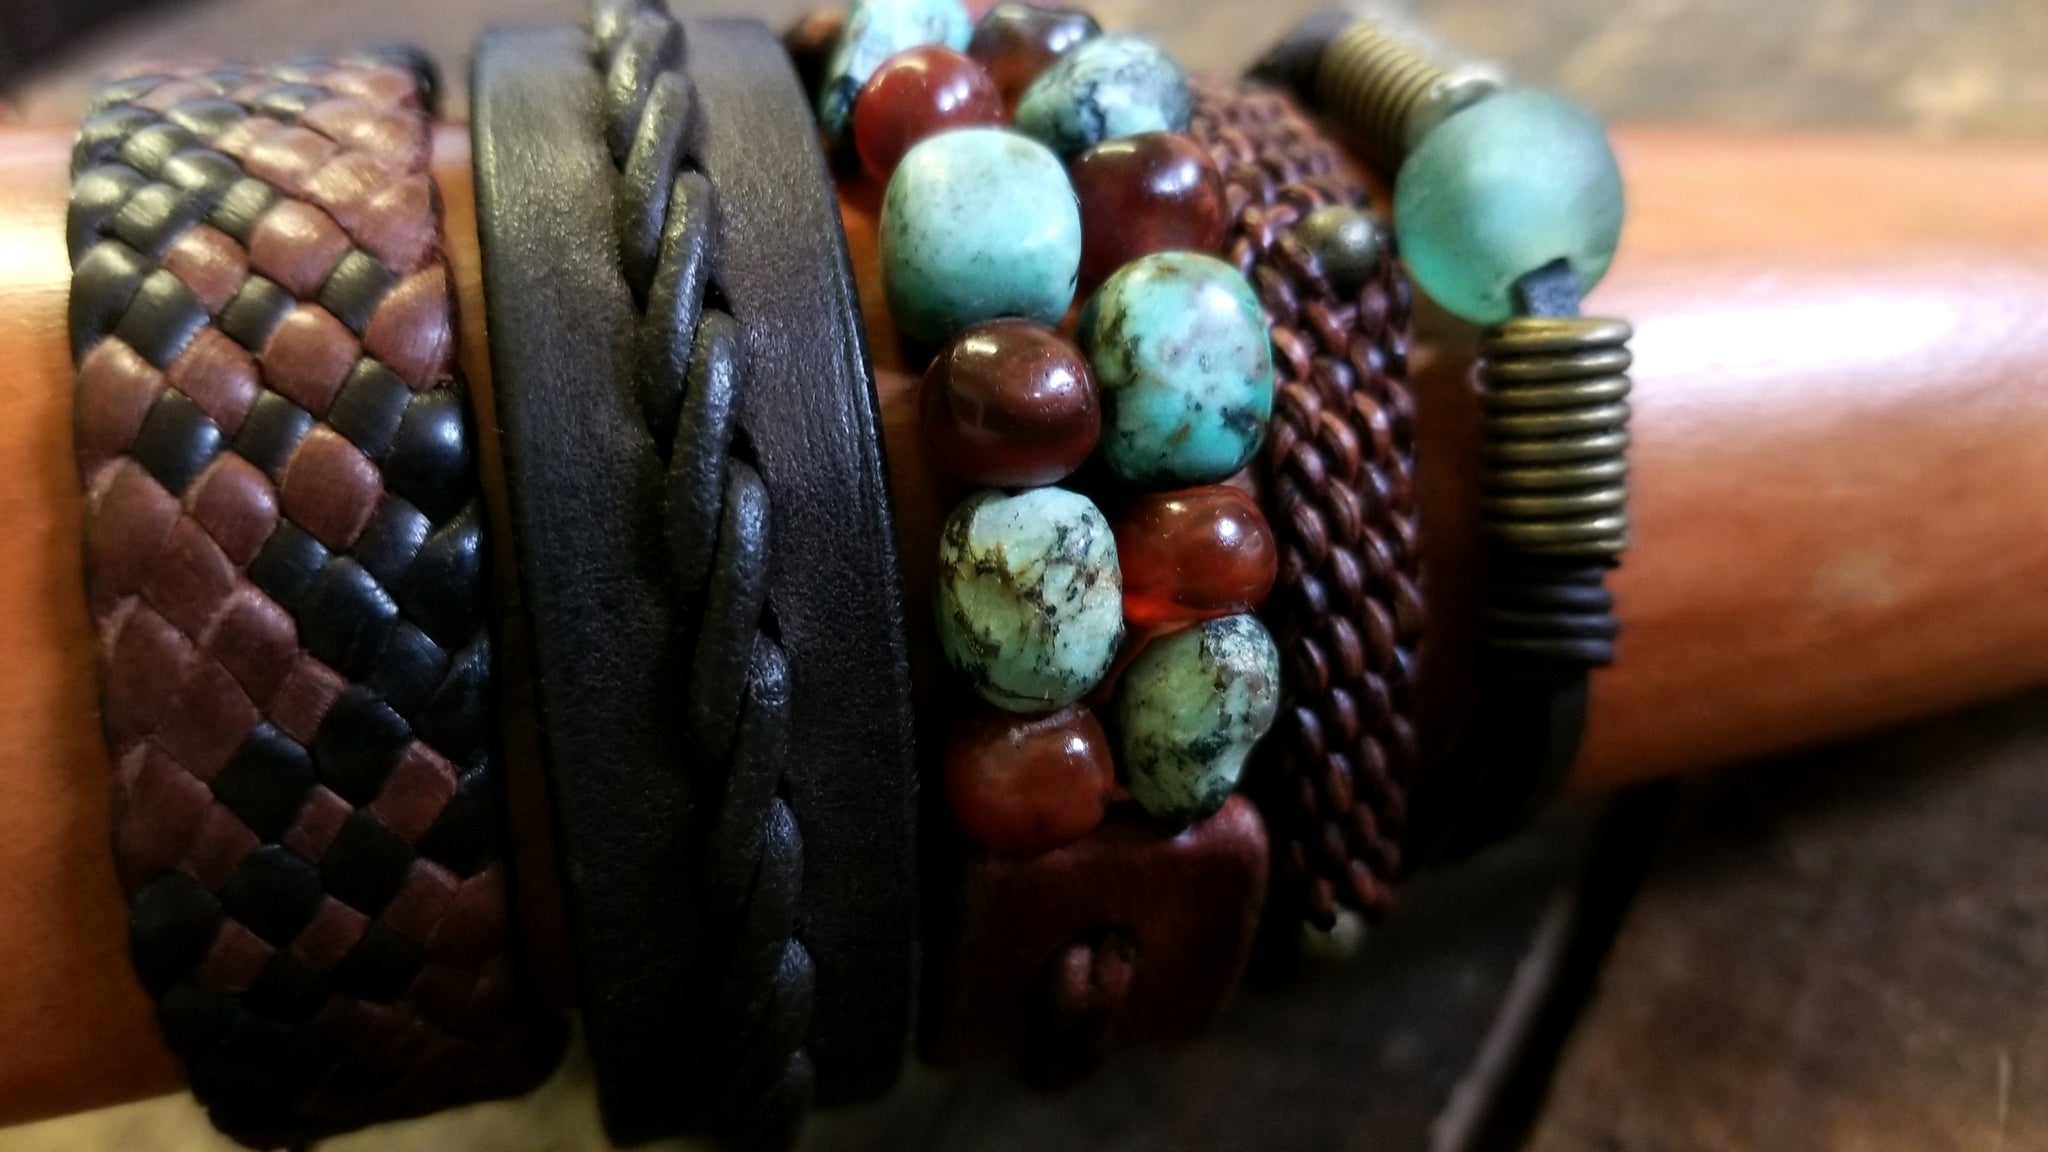 Tano - 5 leather bracelet set, African Turquoise, Red Carnelian, African Glass, Braided Leather, Beaded - Leather Mix Option